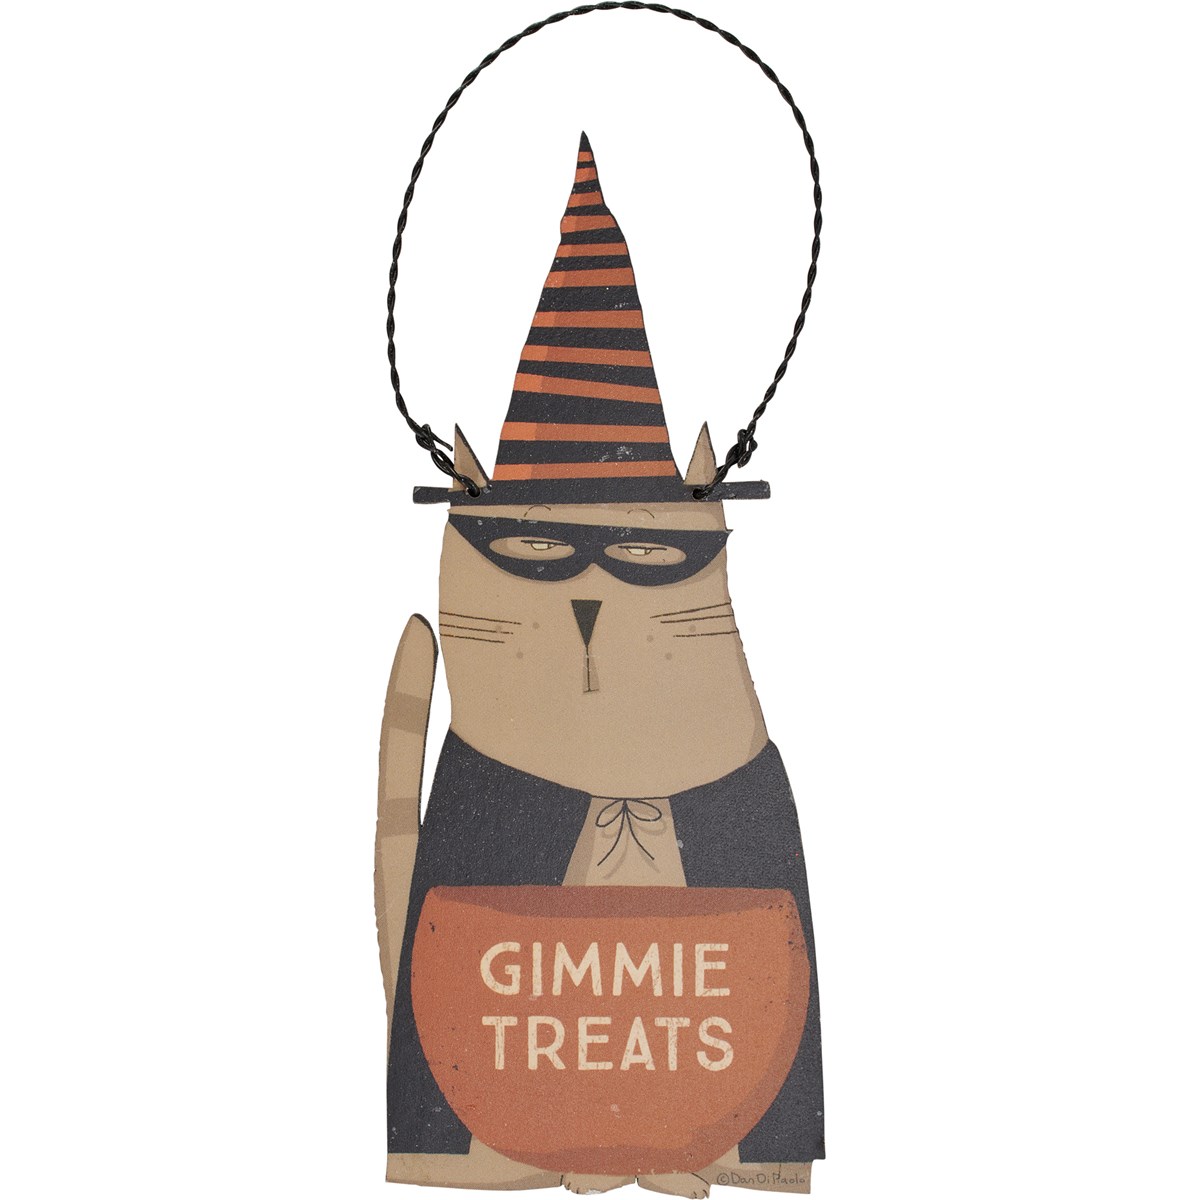 Gimmie Treats Cat Hanging Decor - Wood, Paper, Wire